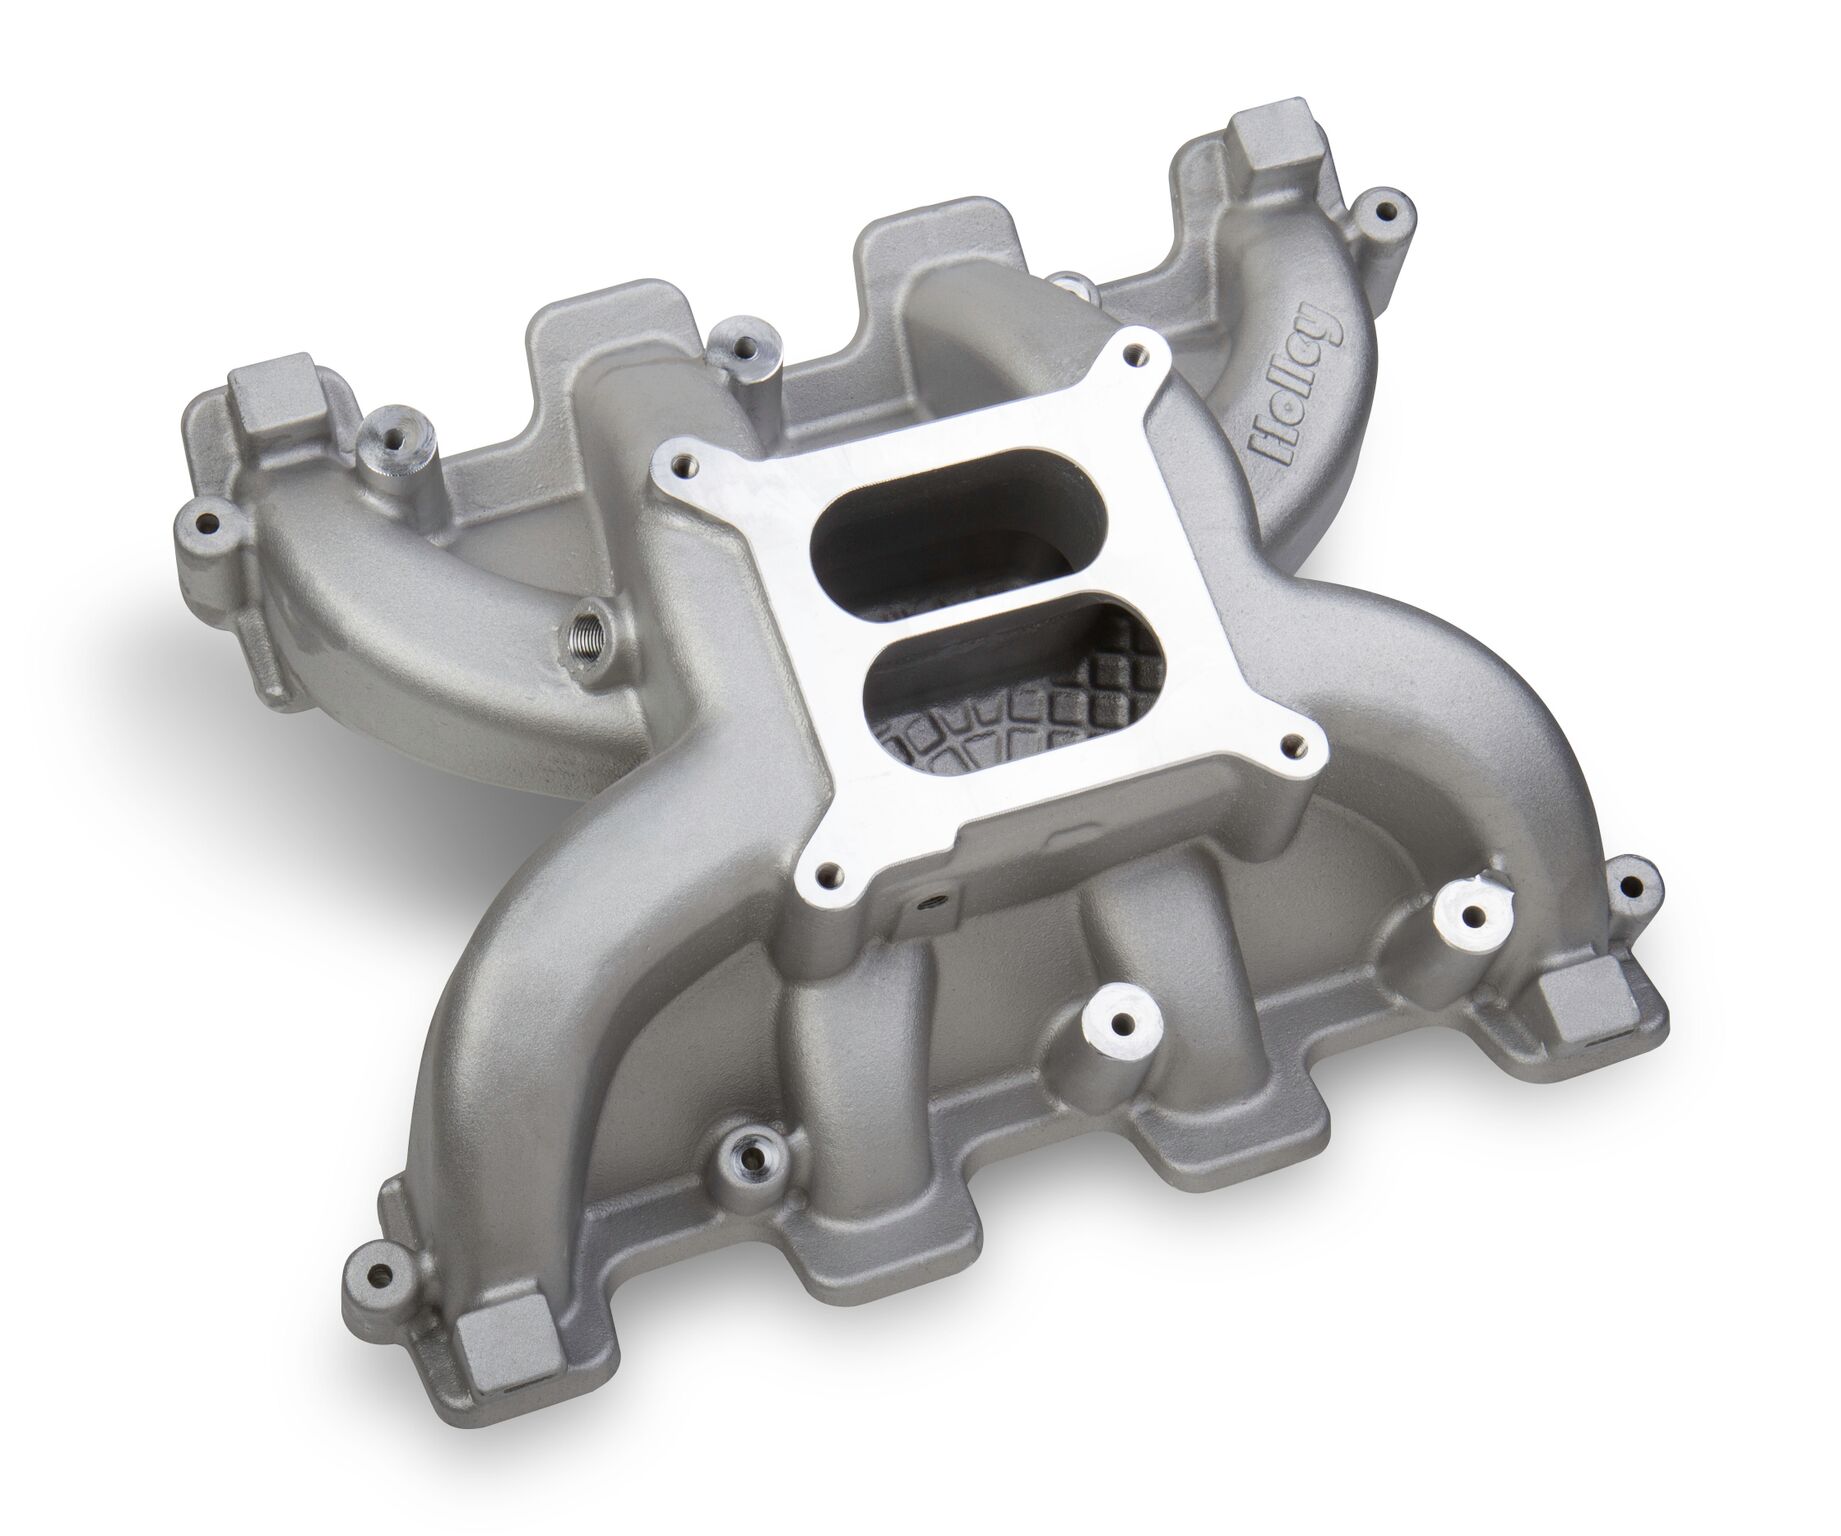 Holley 300-130 Dual Plane Carbureted Intake Manifold for GM LS1/LS2/LS6 Satin